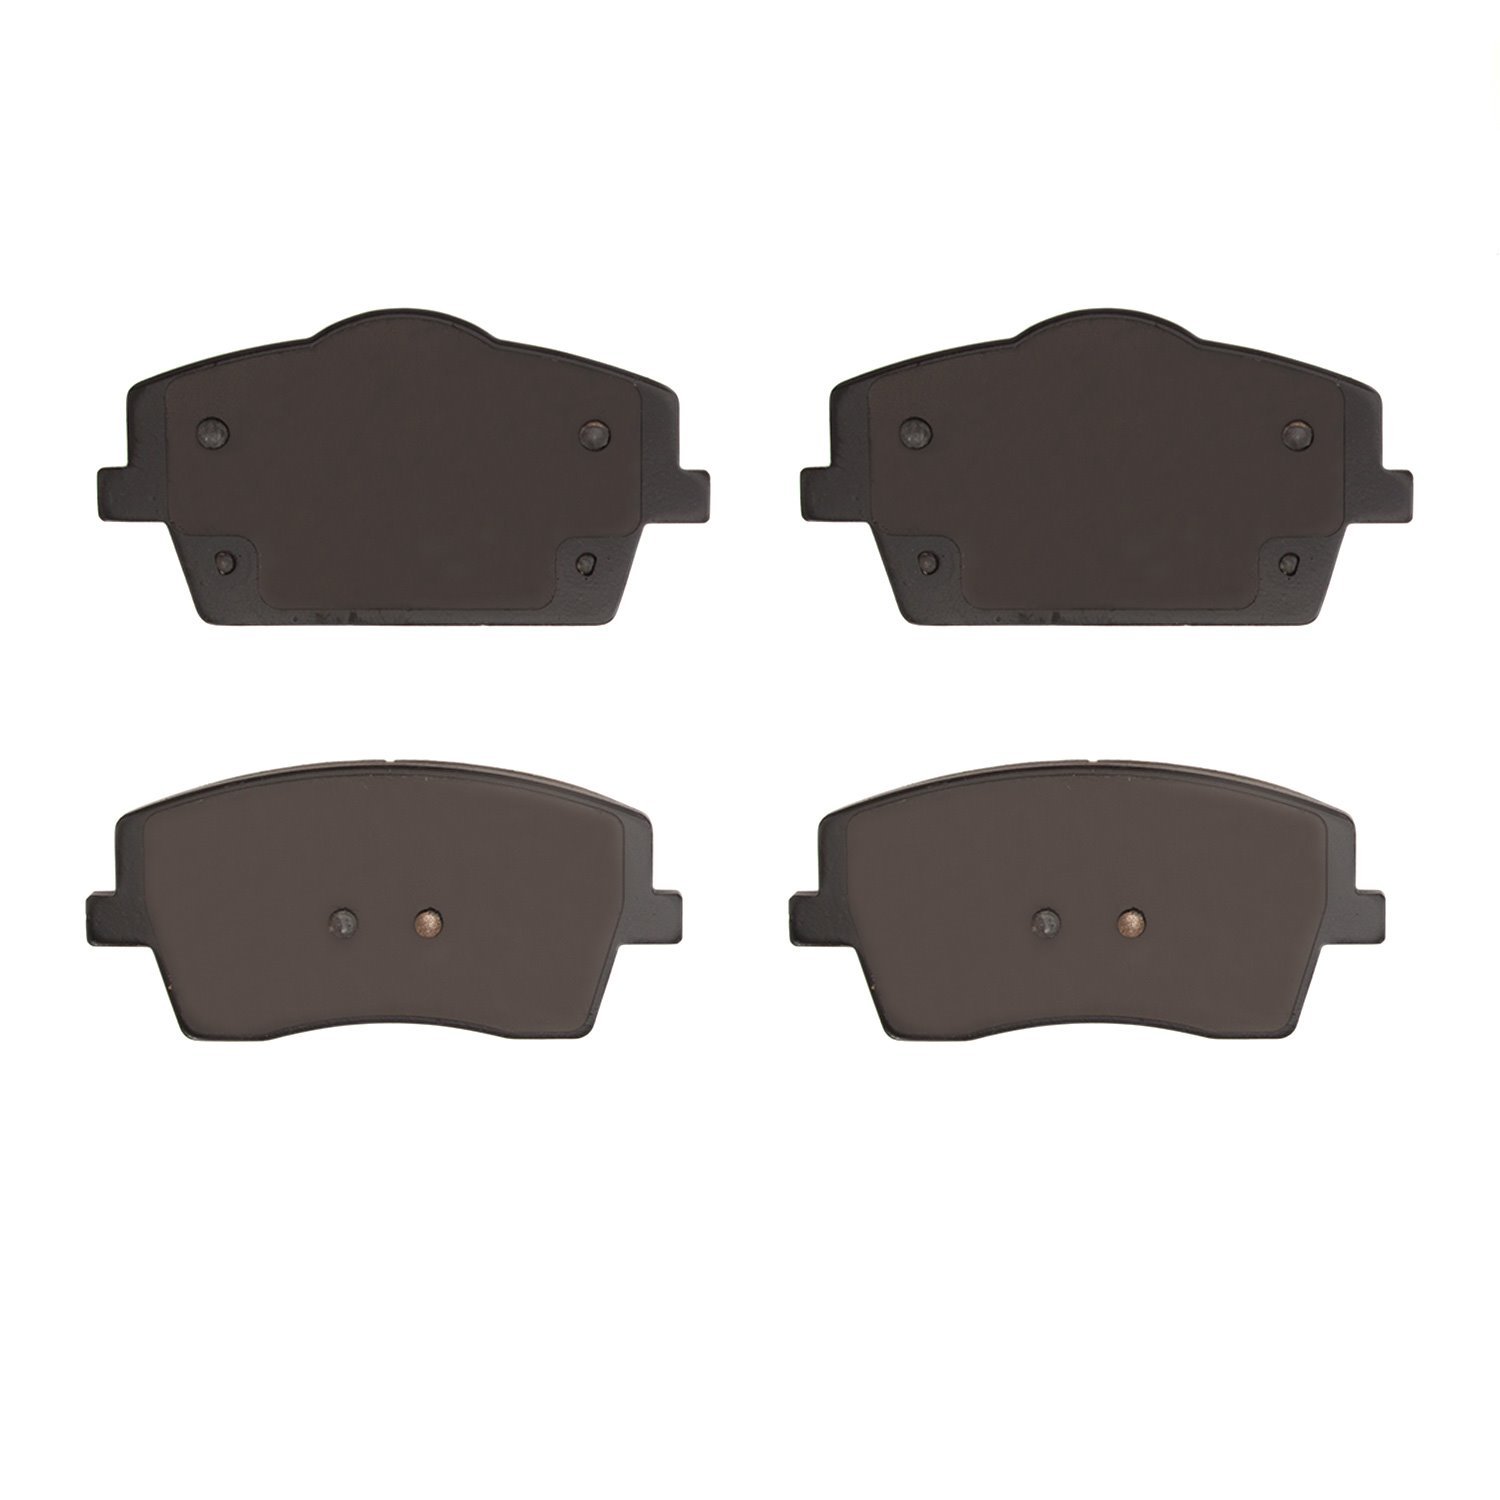 1310-2137-00 3000-Series Ceramic Brake Pads, Fits Select Volvo, Position: Front